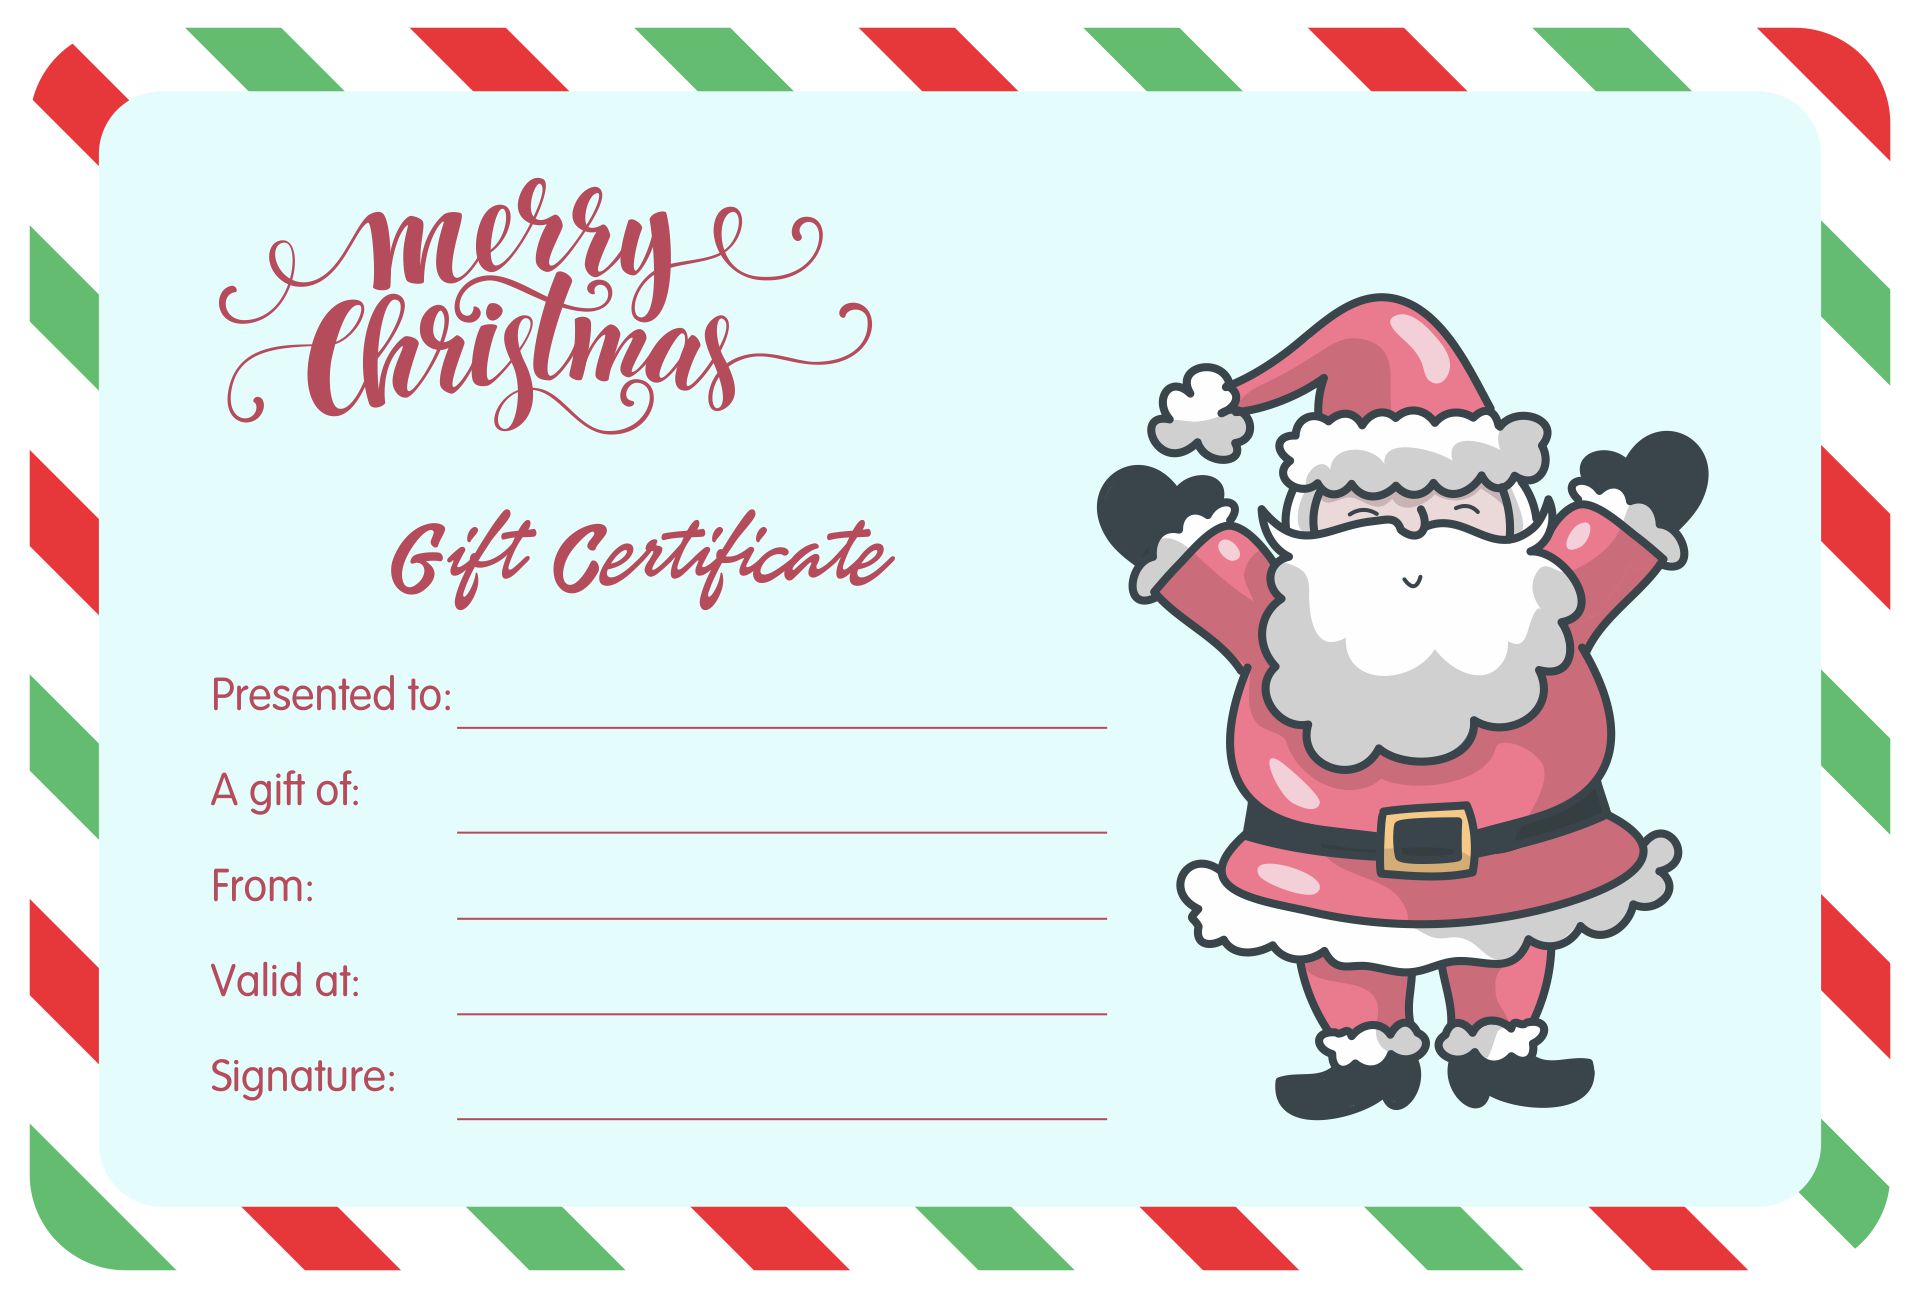 Gift Certificate From Santa Claus Printable